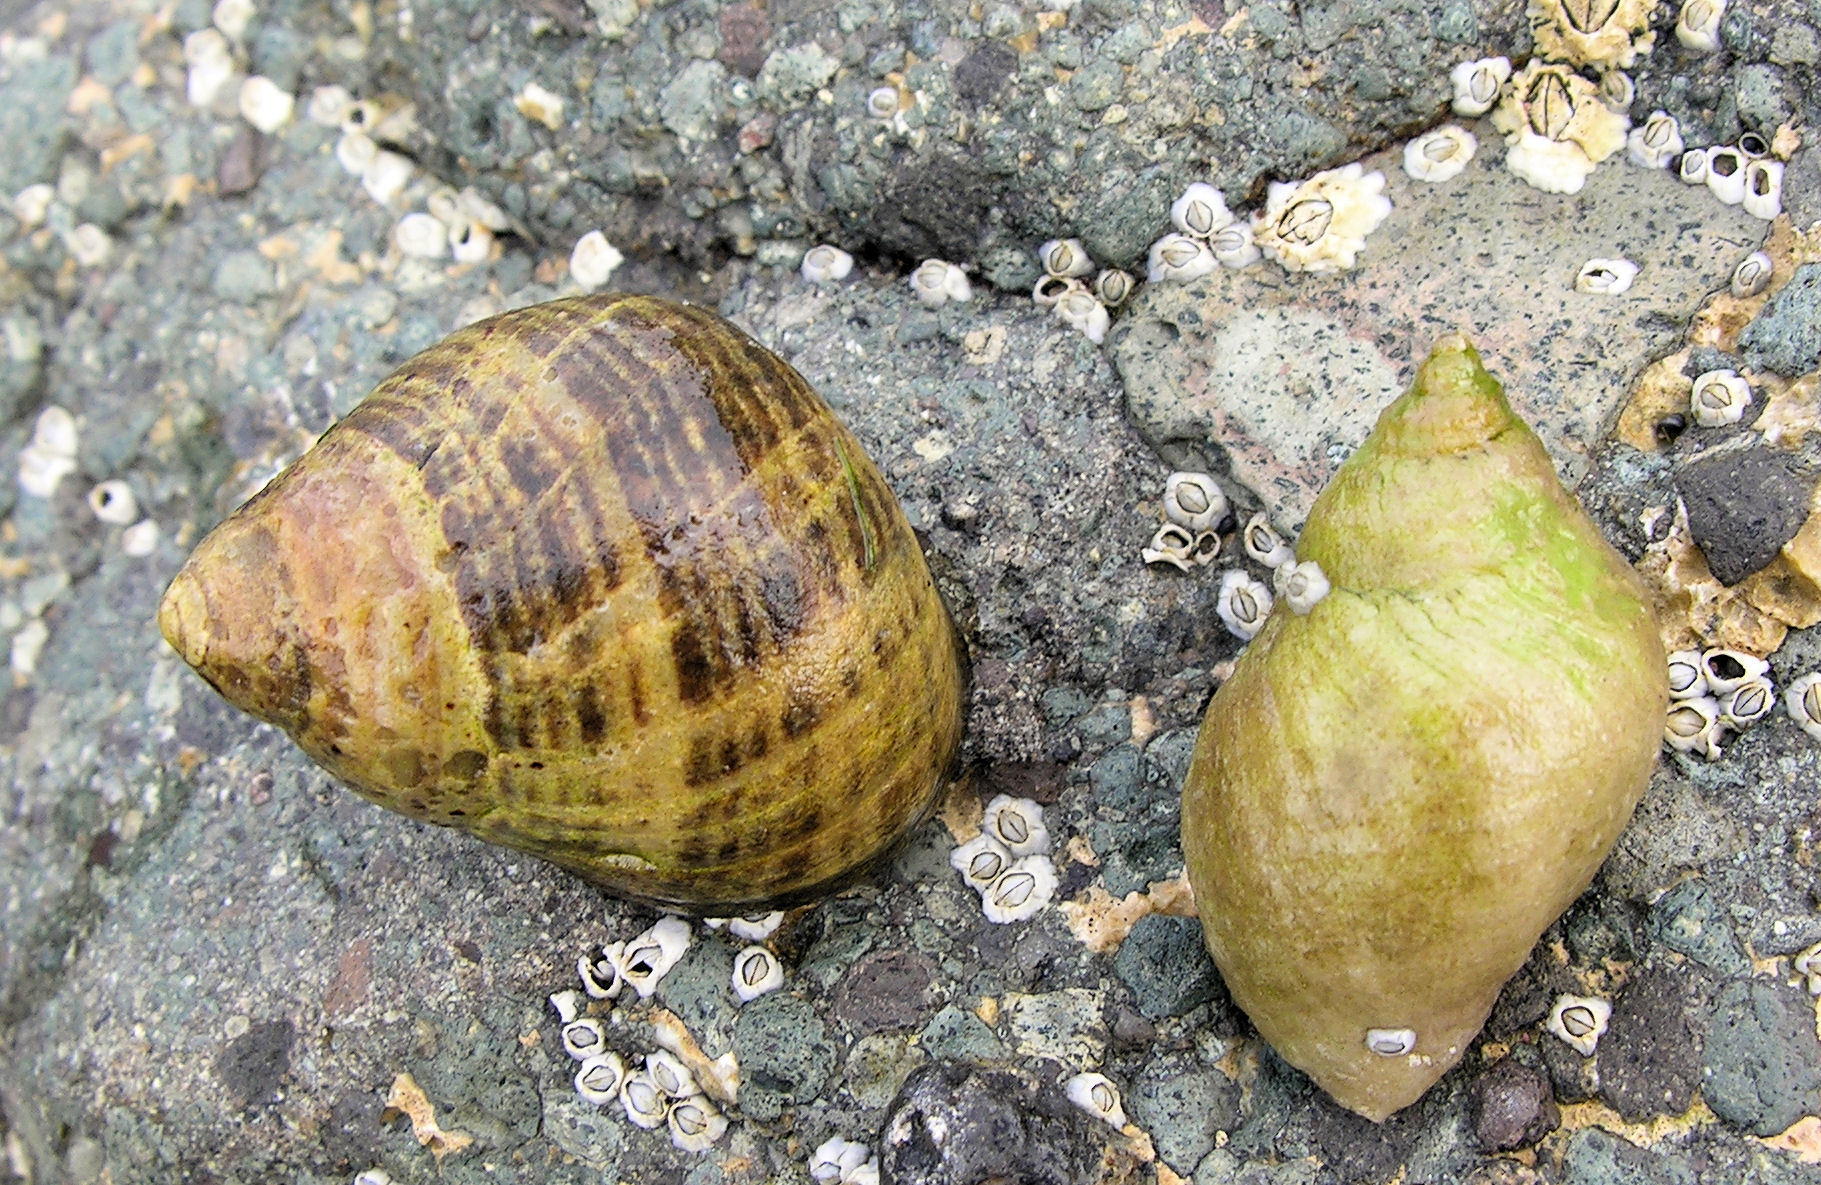 Dog whelk (right) with periwinkle